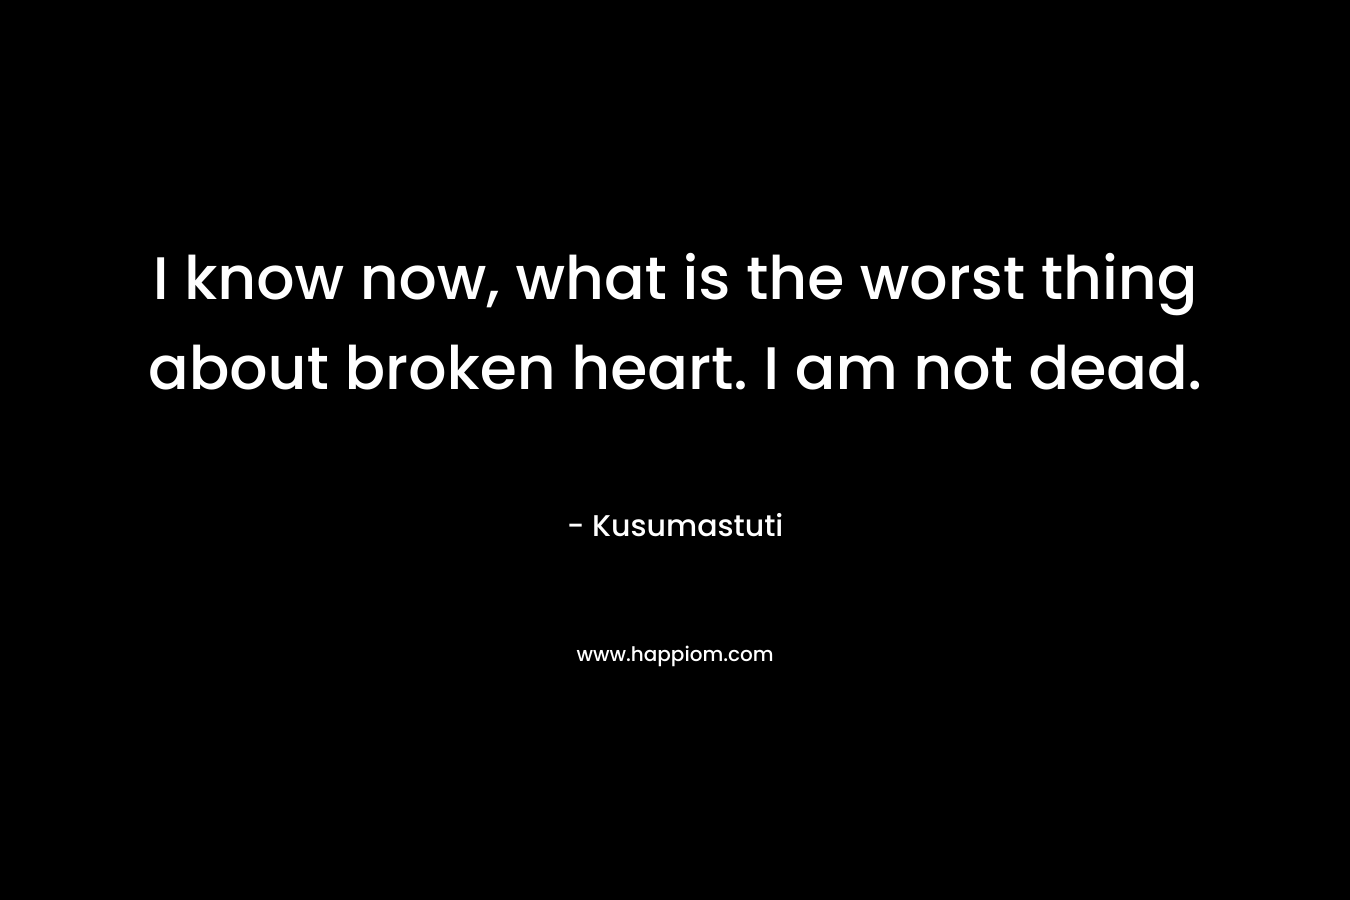 I know now, what is the worst thing about broken heart. I am not dead. – Kusumastuti